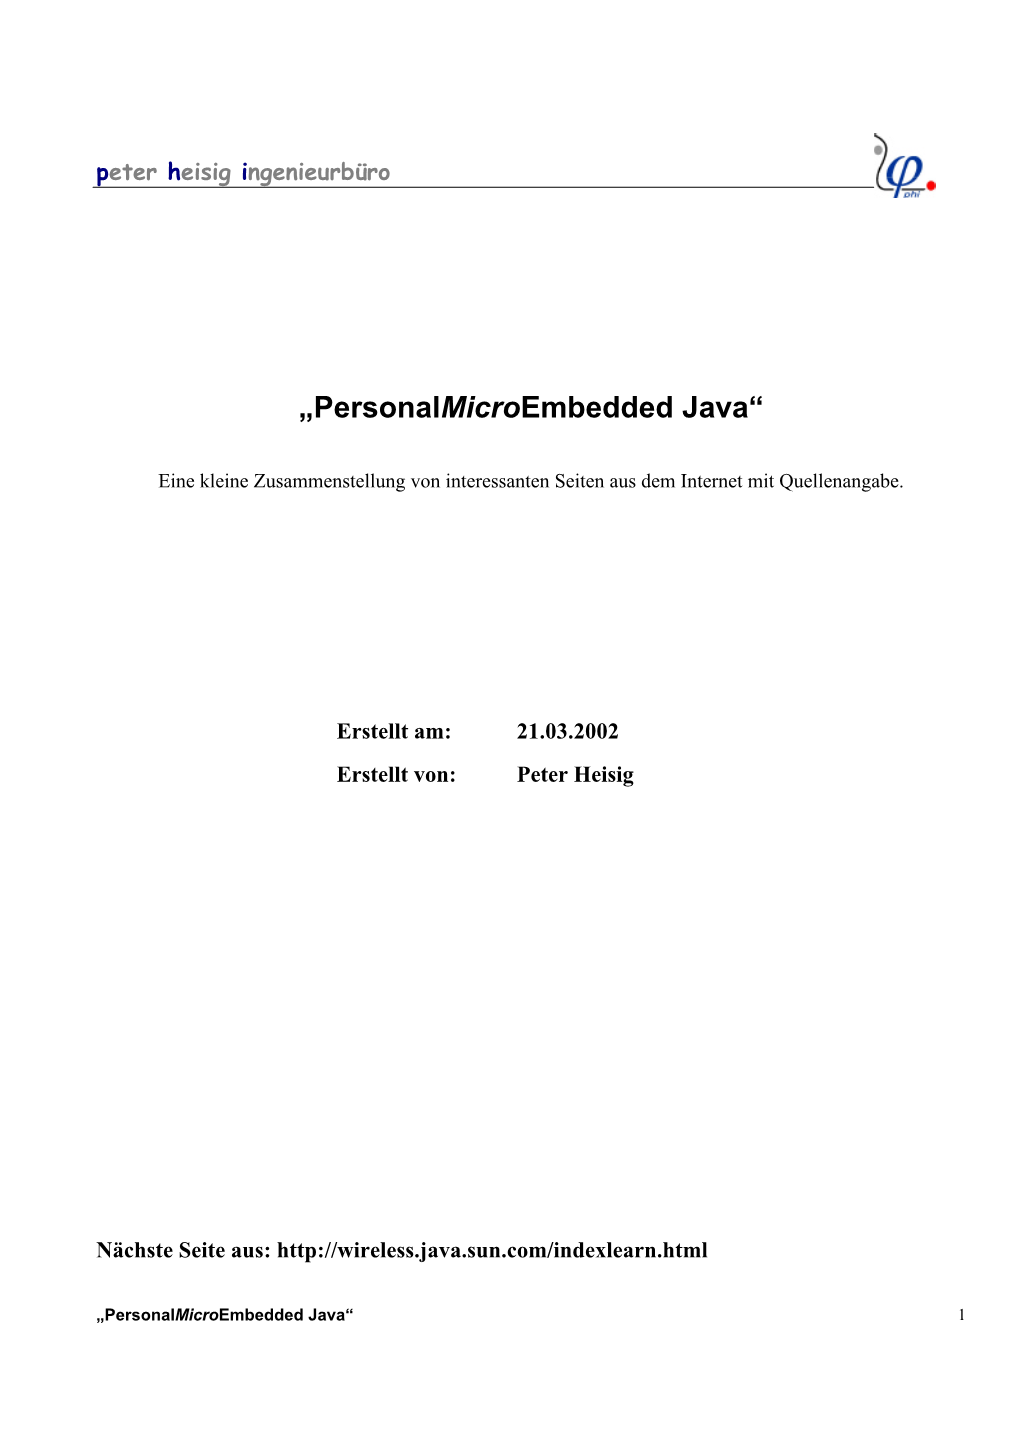 „Personalmicroembedded Java“